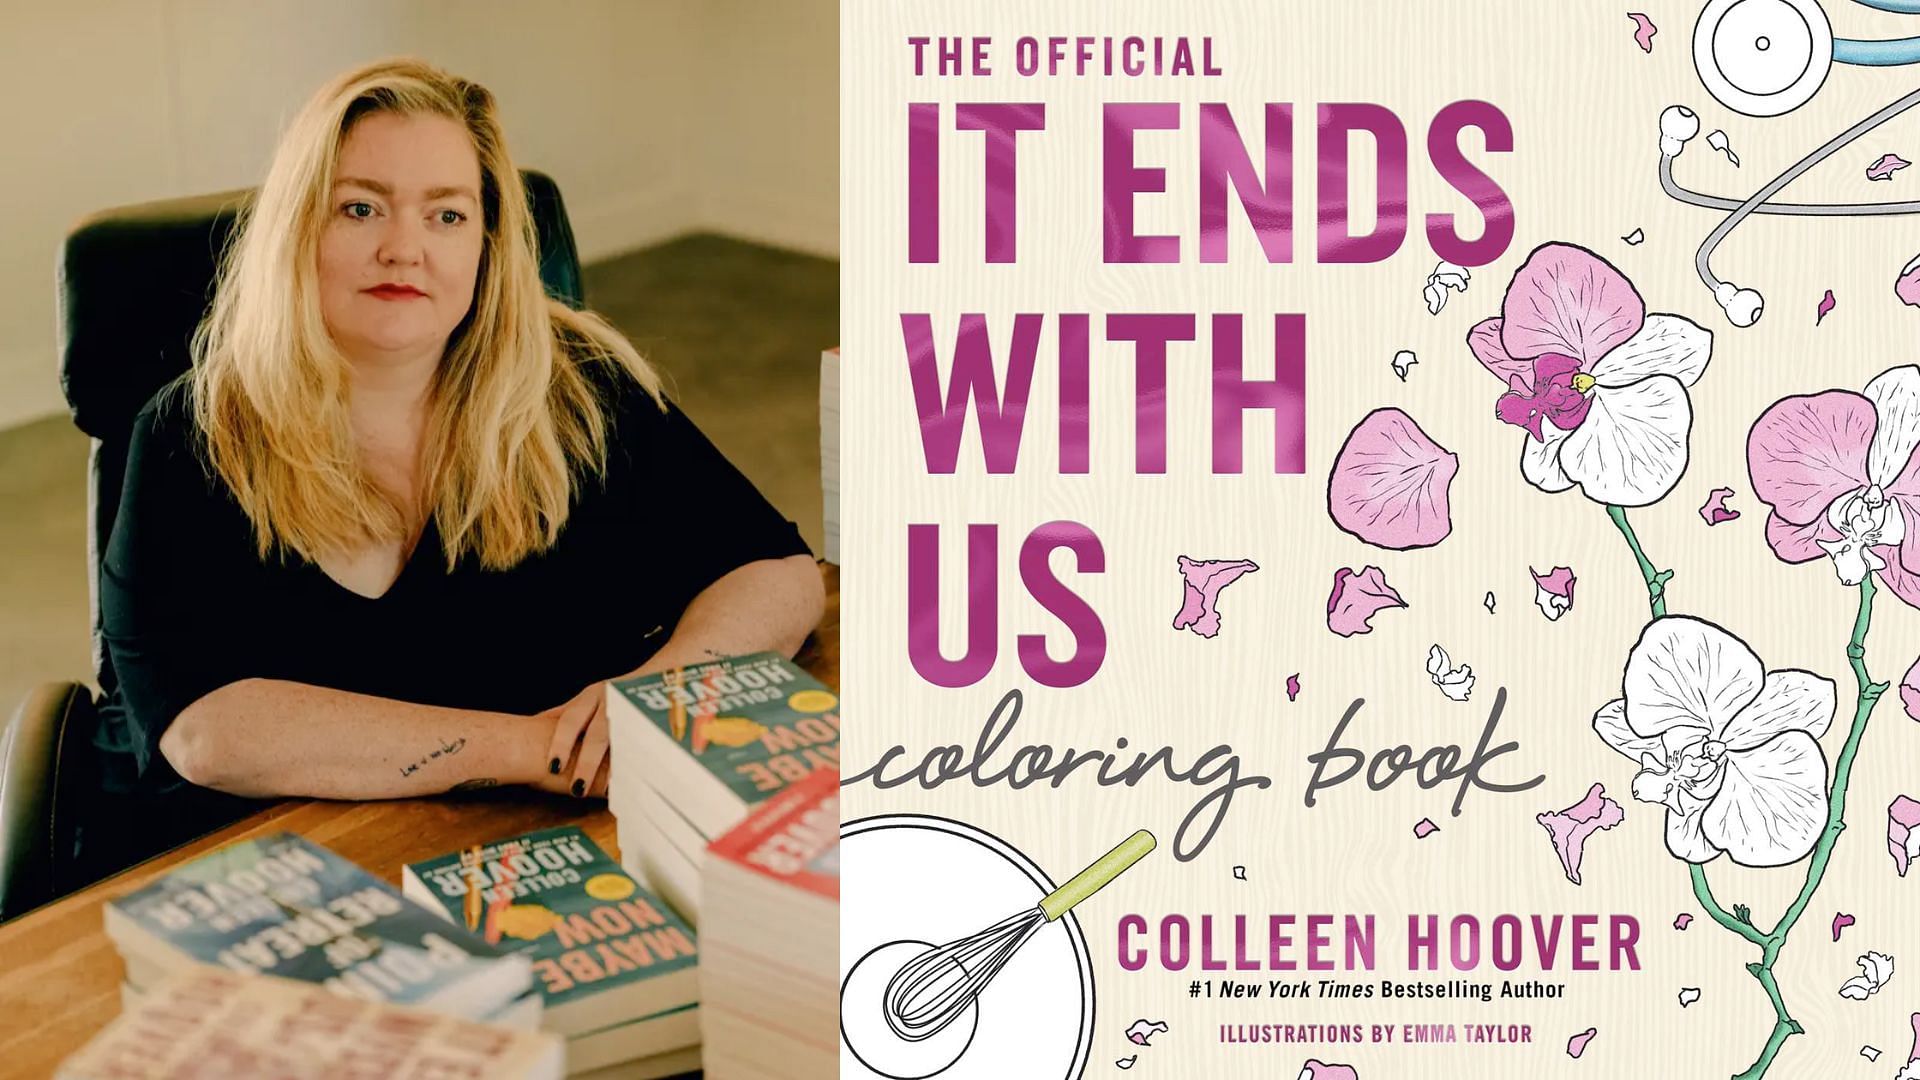 Bestselling writer Colleen Hoover apologizes for planned coloring book  based on domestic violence novel